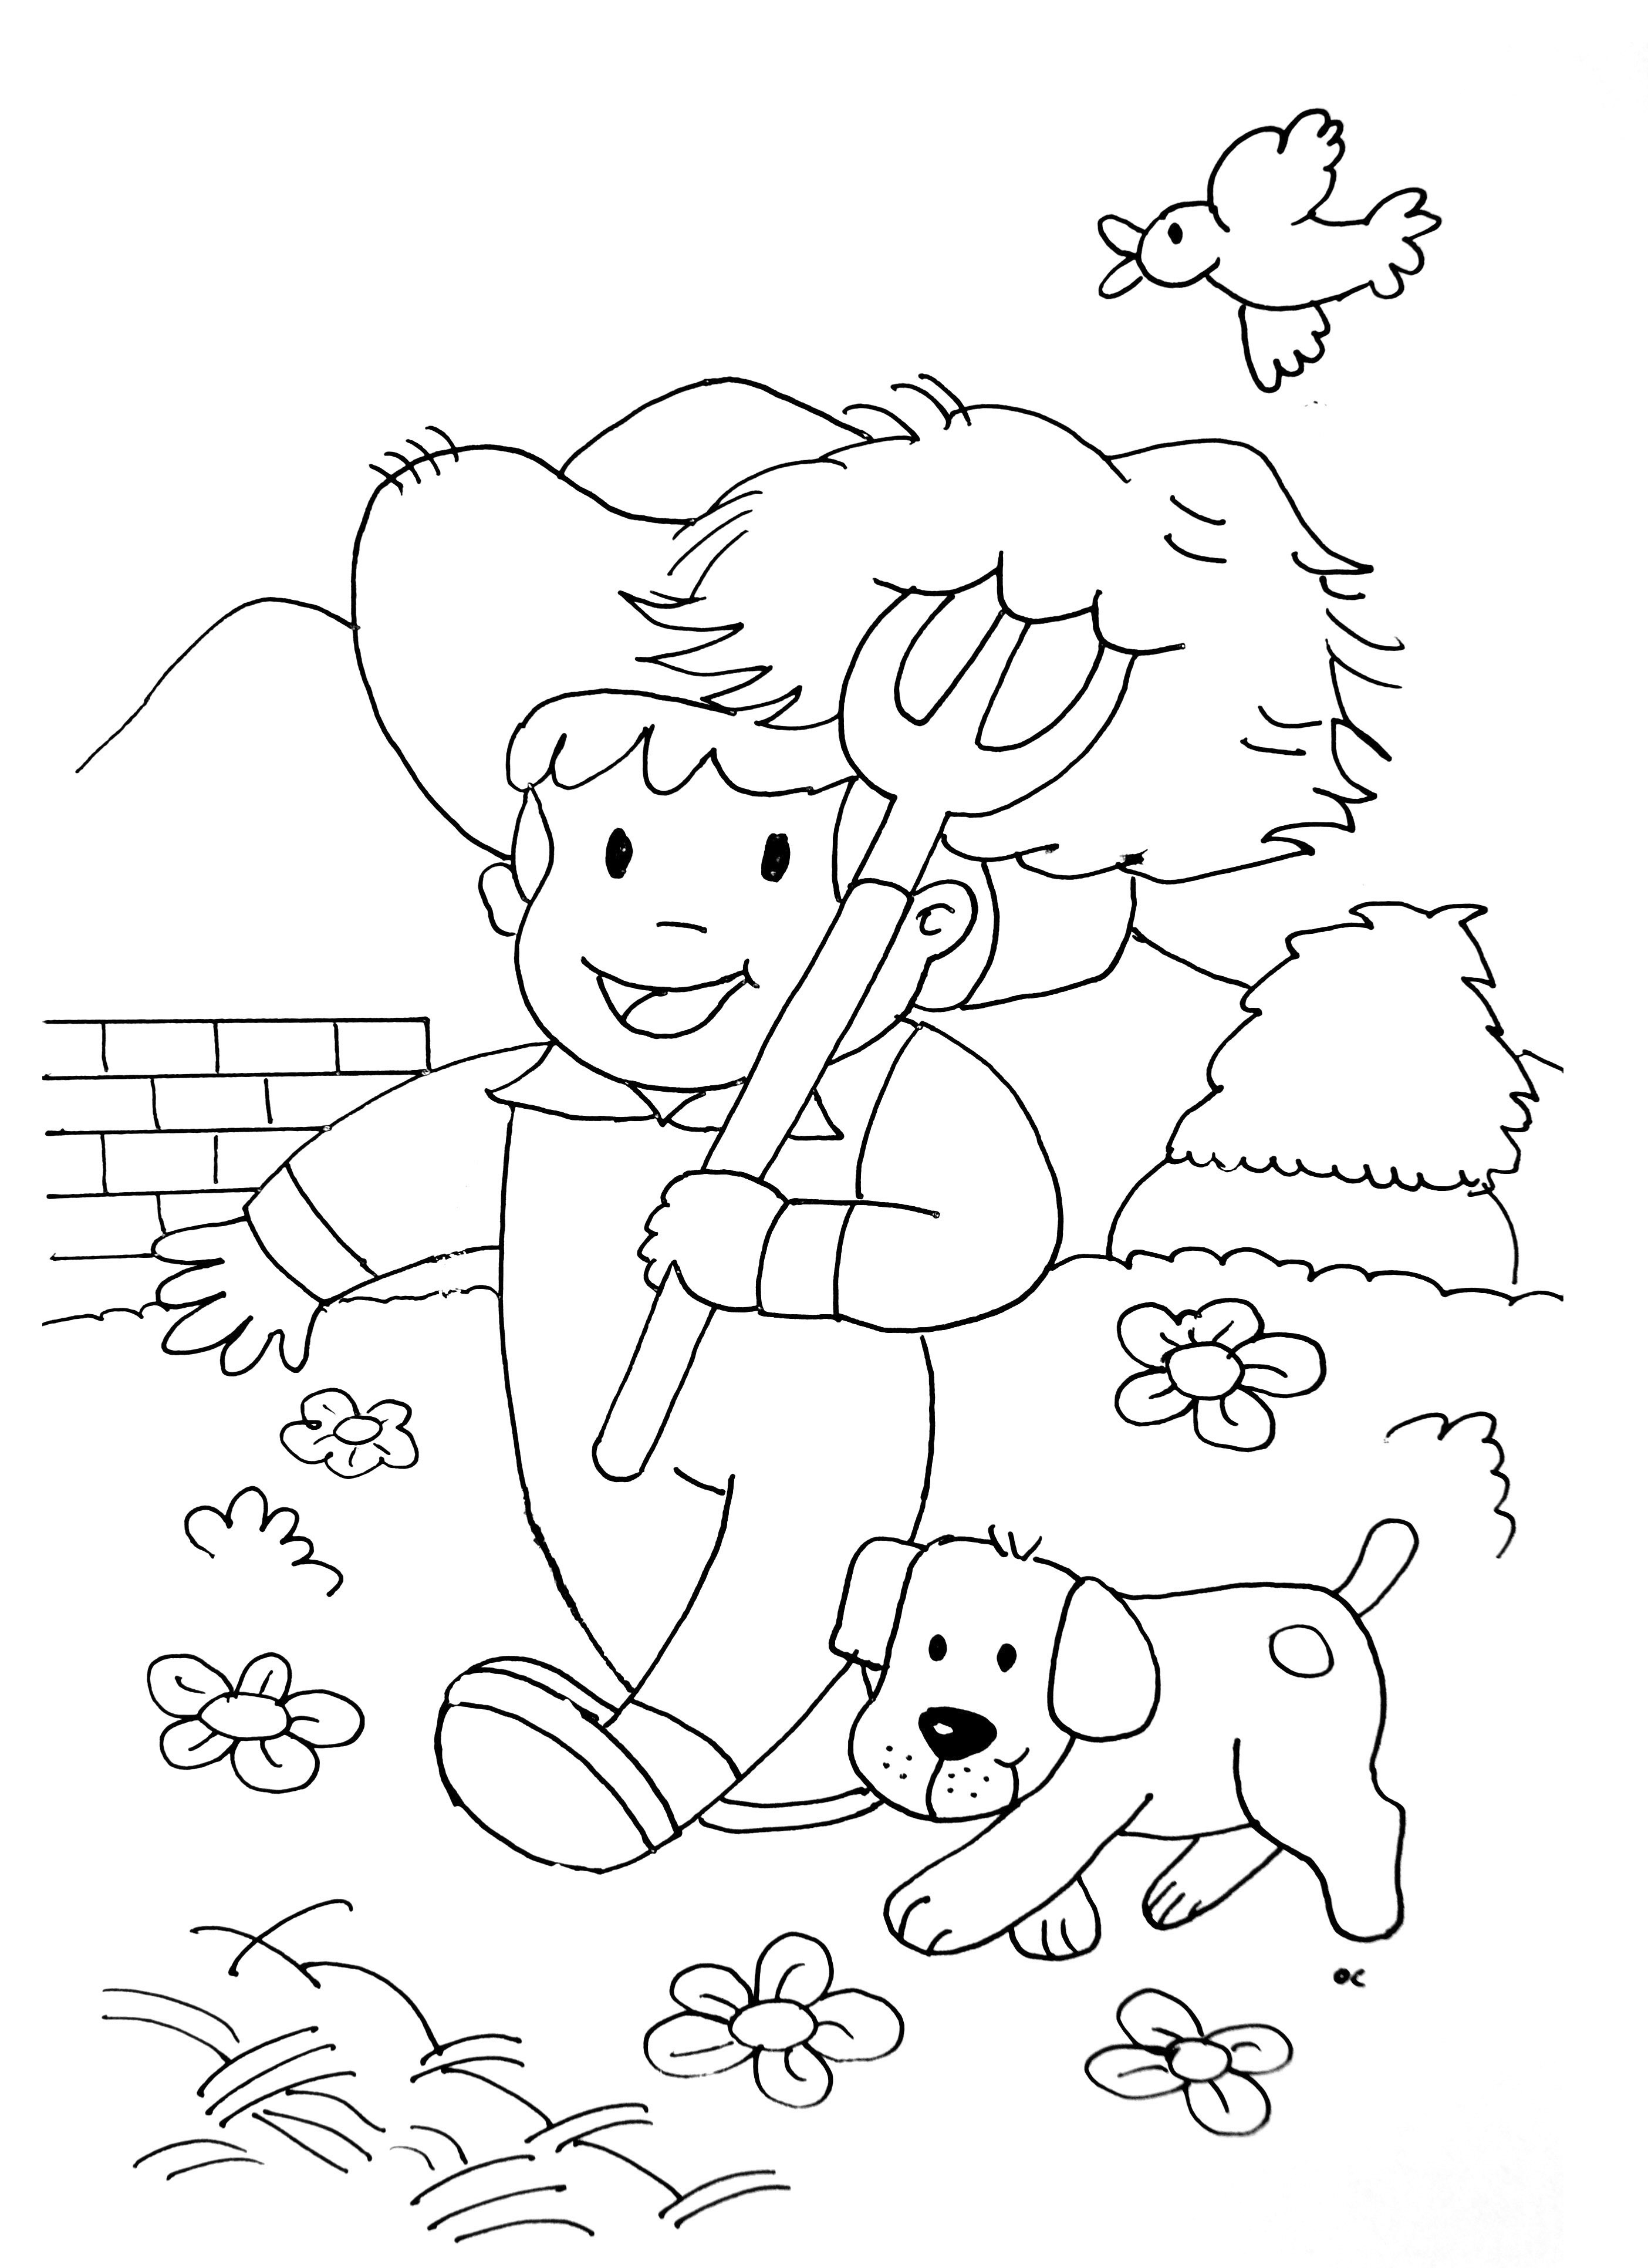 Farm Animal Coloring Pages For Toddlers at GetDrawings | Free download